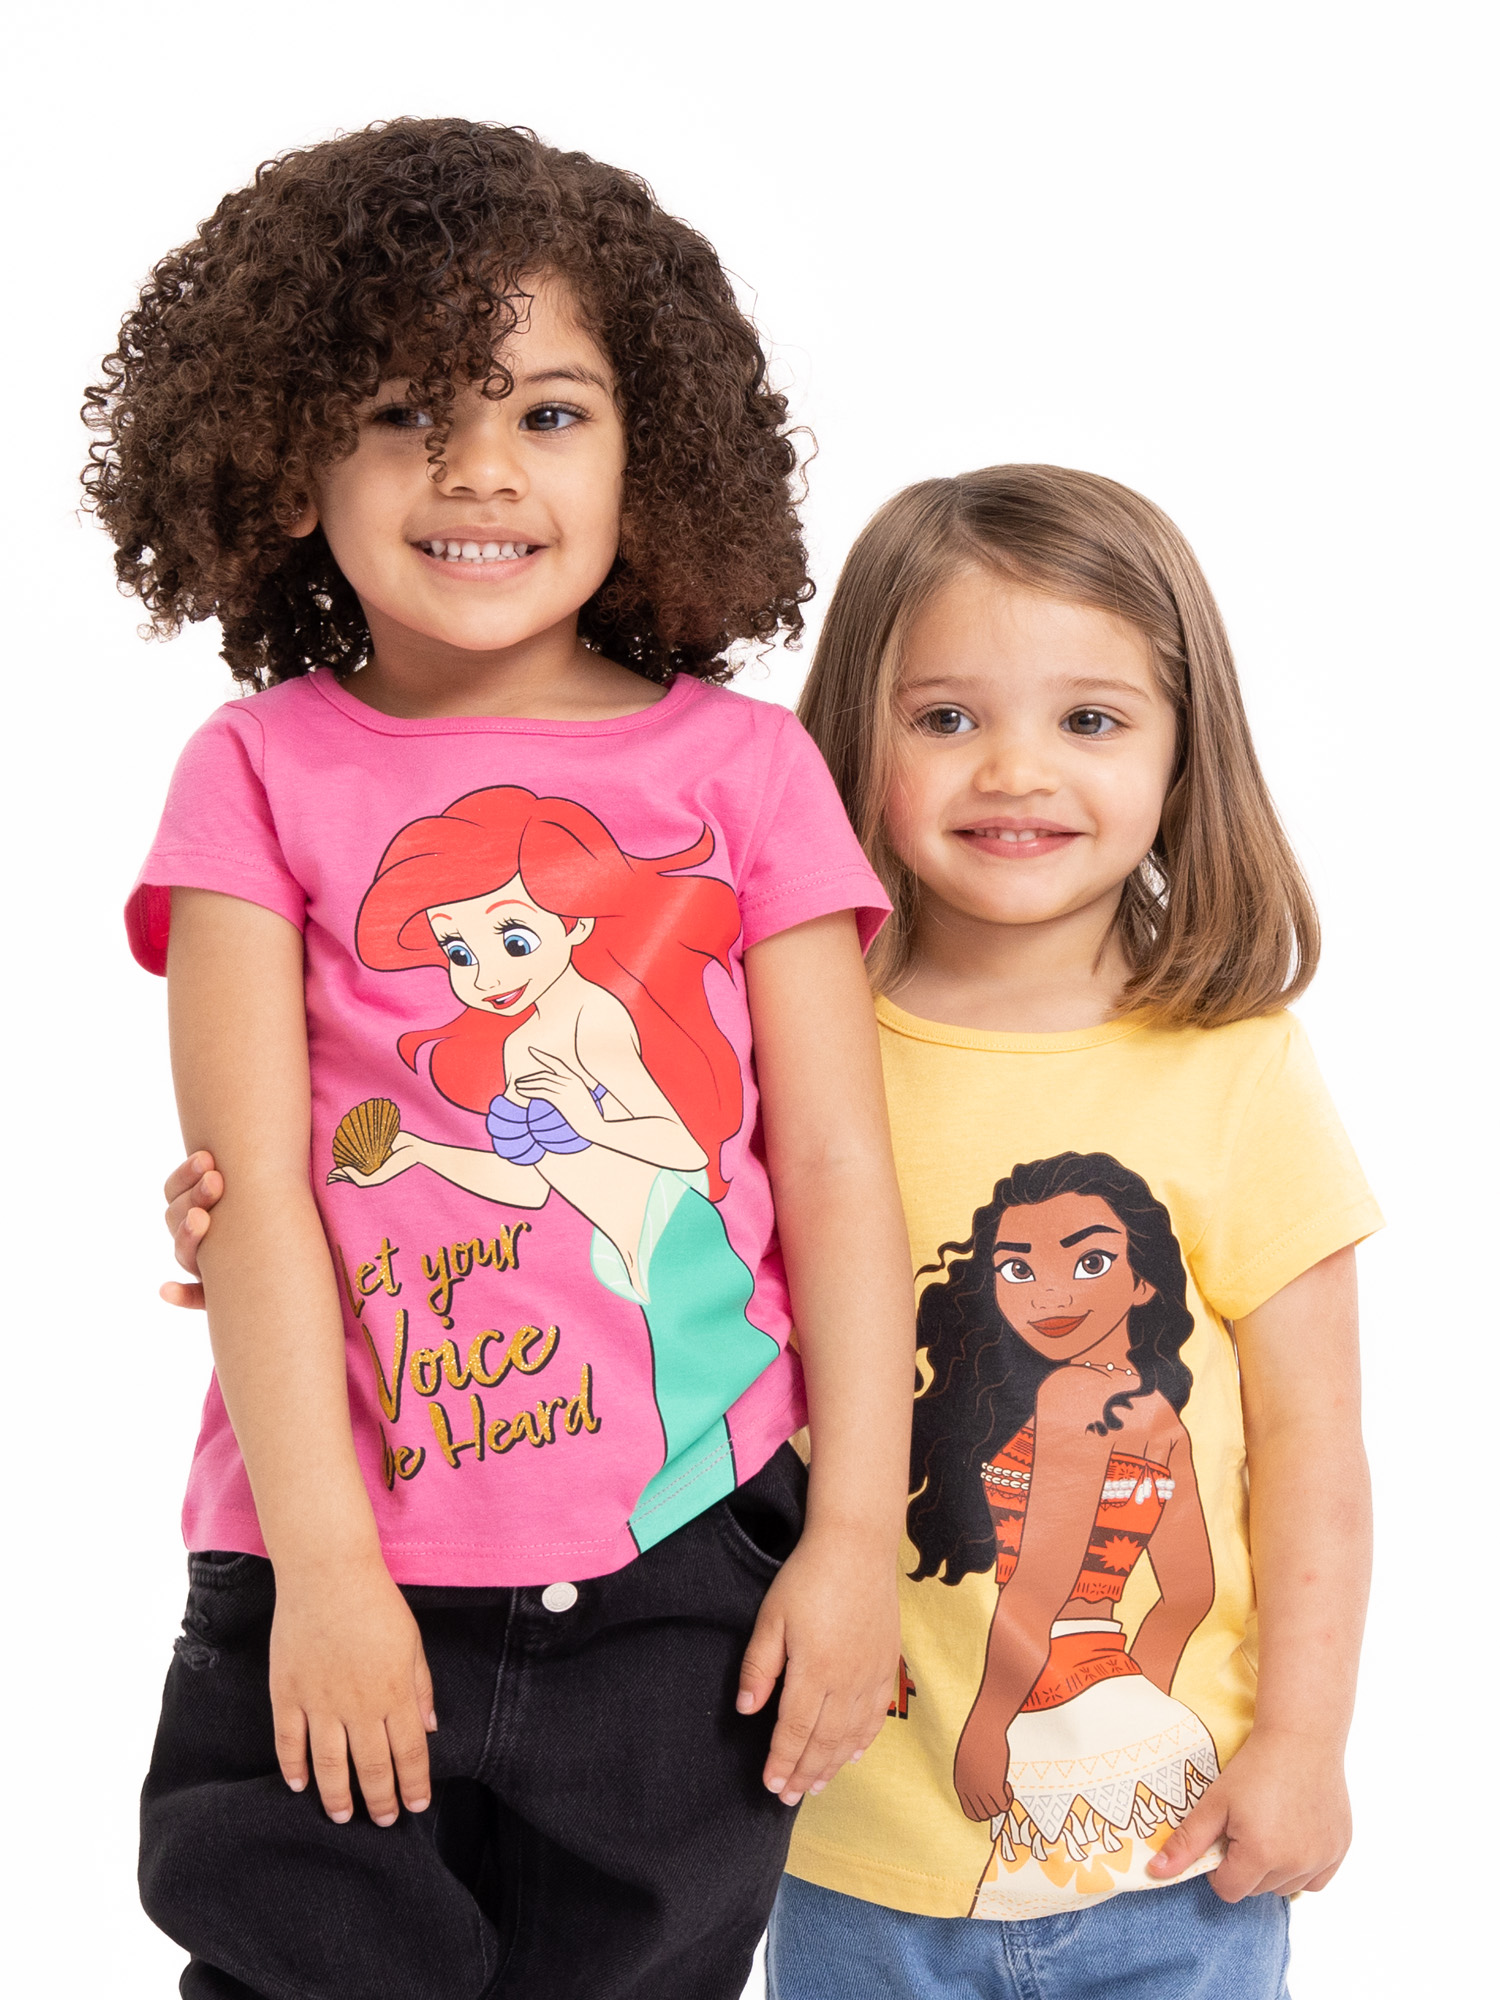 Disney Princess Toddler Girls Fashion T-Shirts with Short Sleeves, 4-Pack, Sizes 2T-5T - image 3 of 9